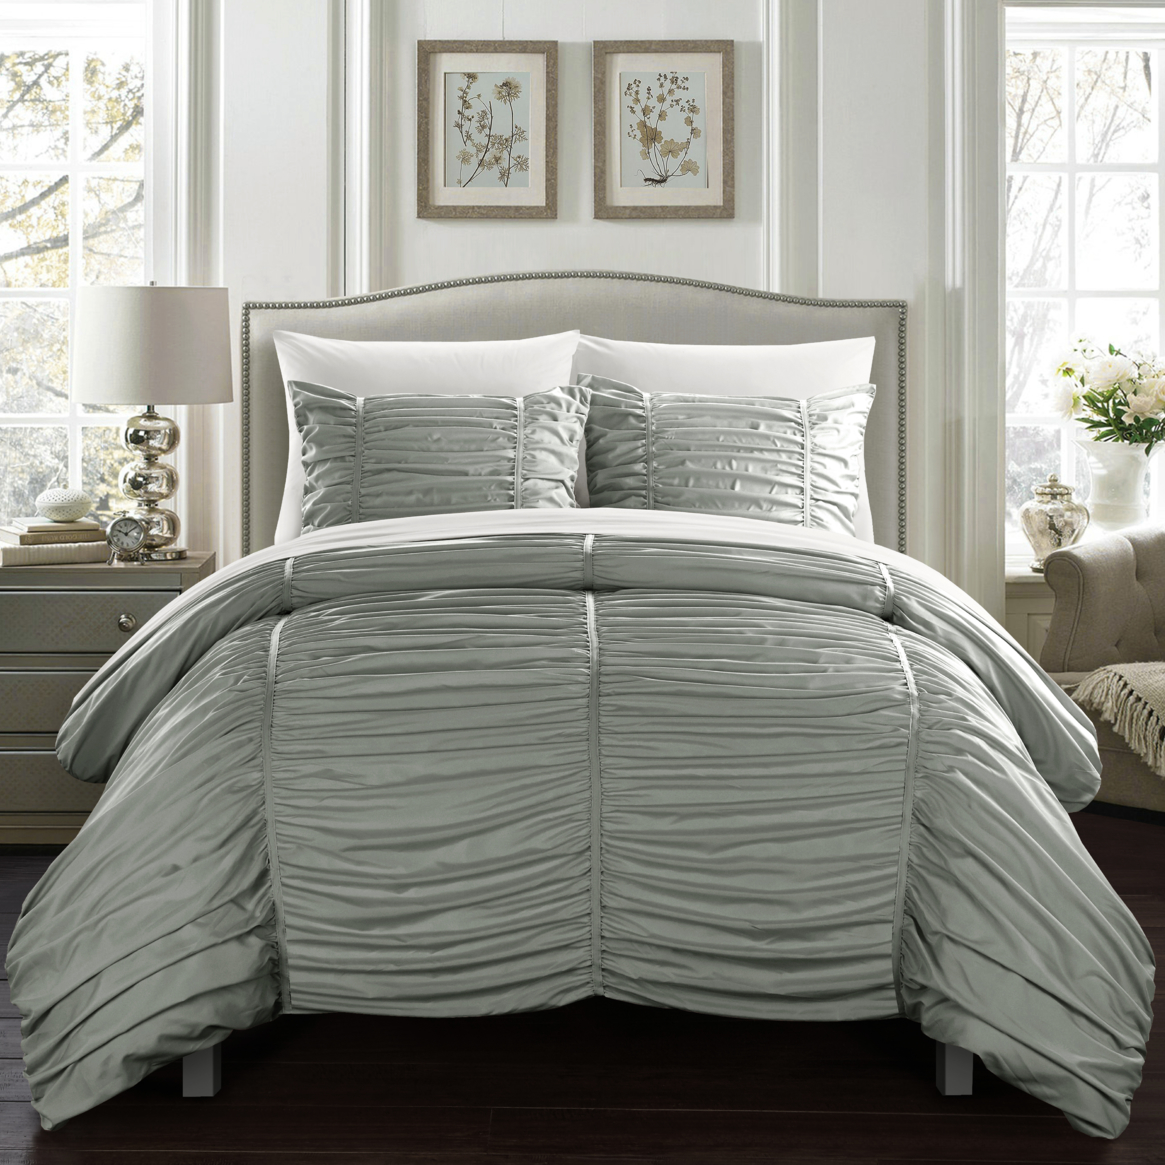 Kleia 7 Or 5 Piece Comforter Set Contemporary Striped Ruched Ruffled Design Bed In A Bag - Grey, Twin X-long